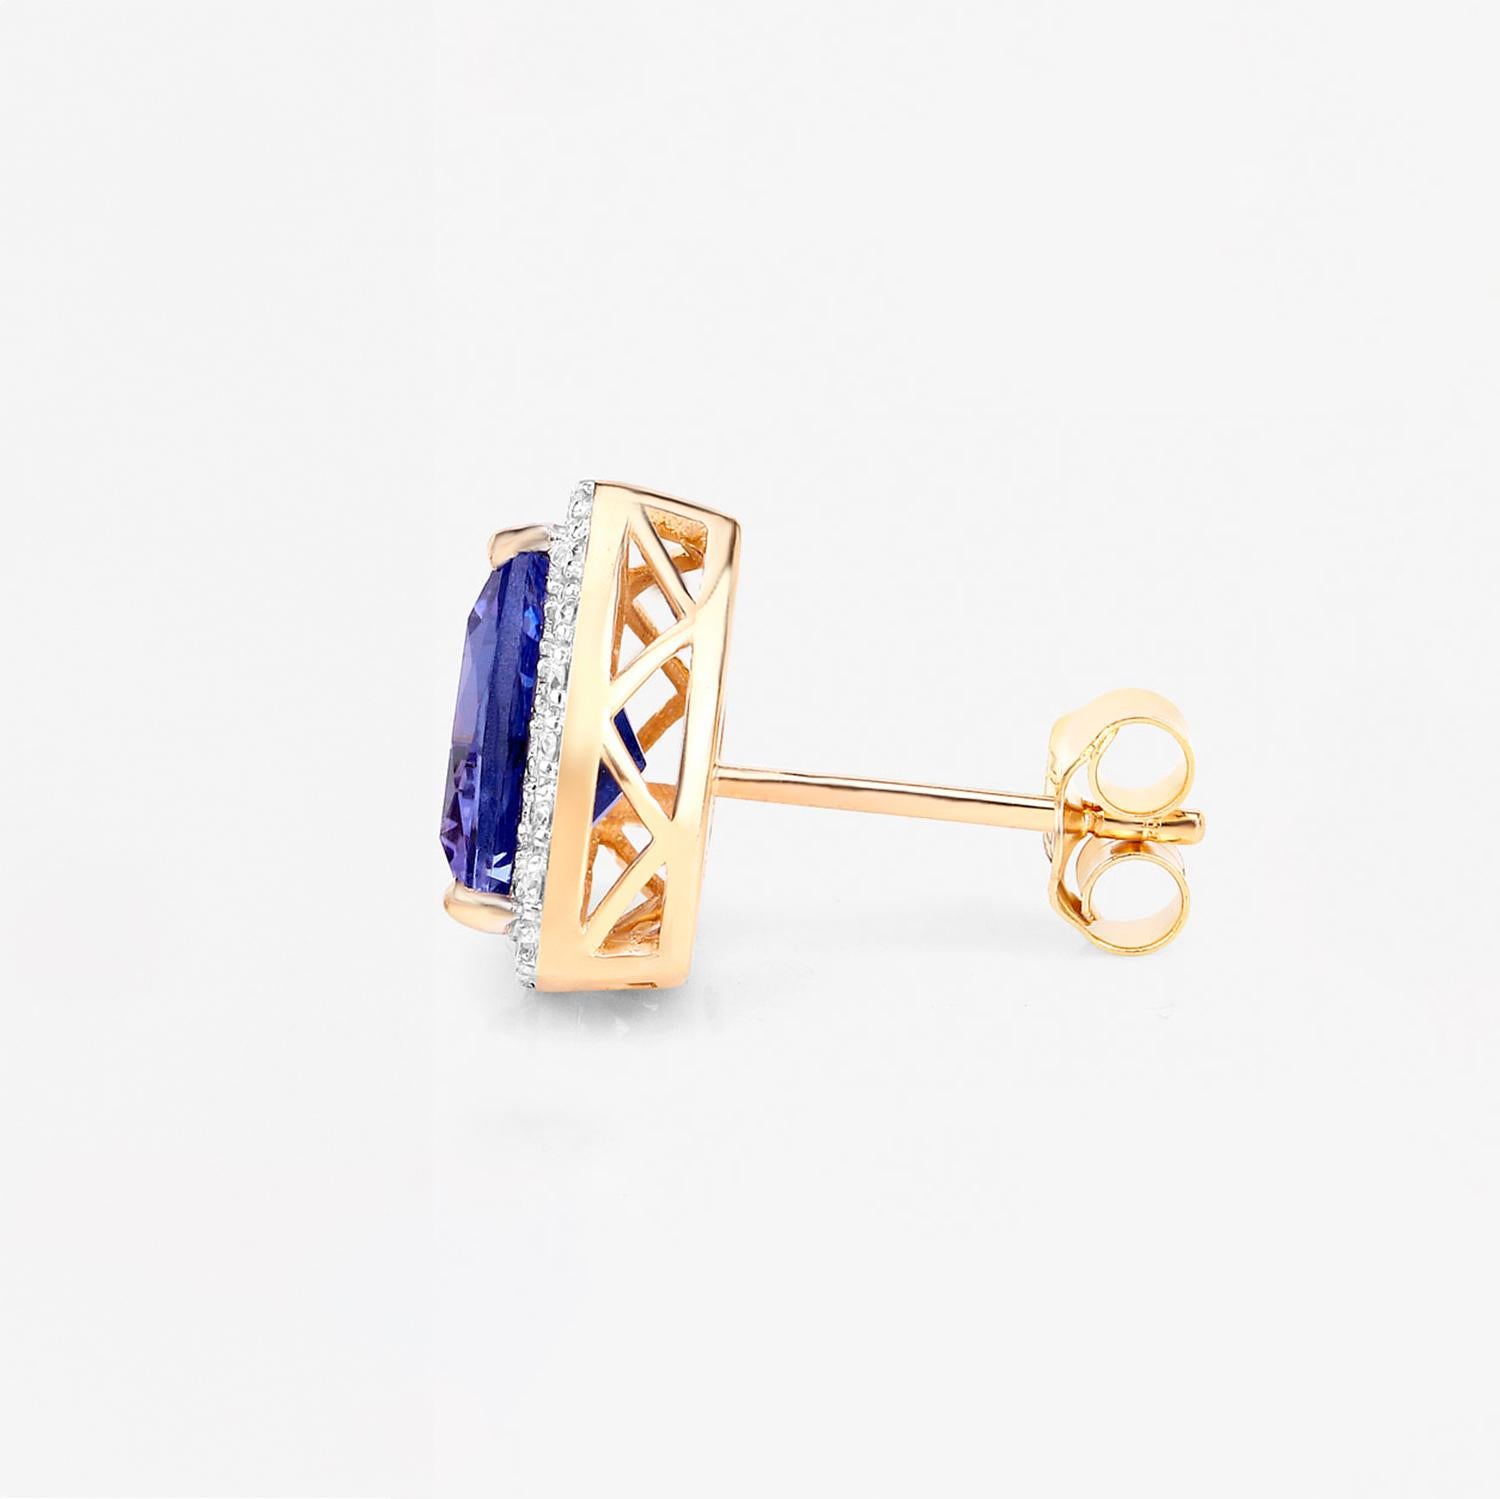 Tanzanite Stud Earrings With Diamonds 3.82 Carats 14K Yellow Gold In Excellent Condition For Sale In Laguna Niguel, CA